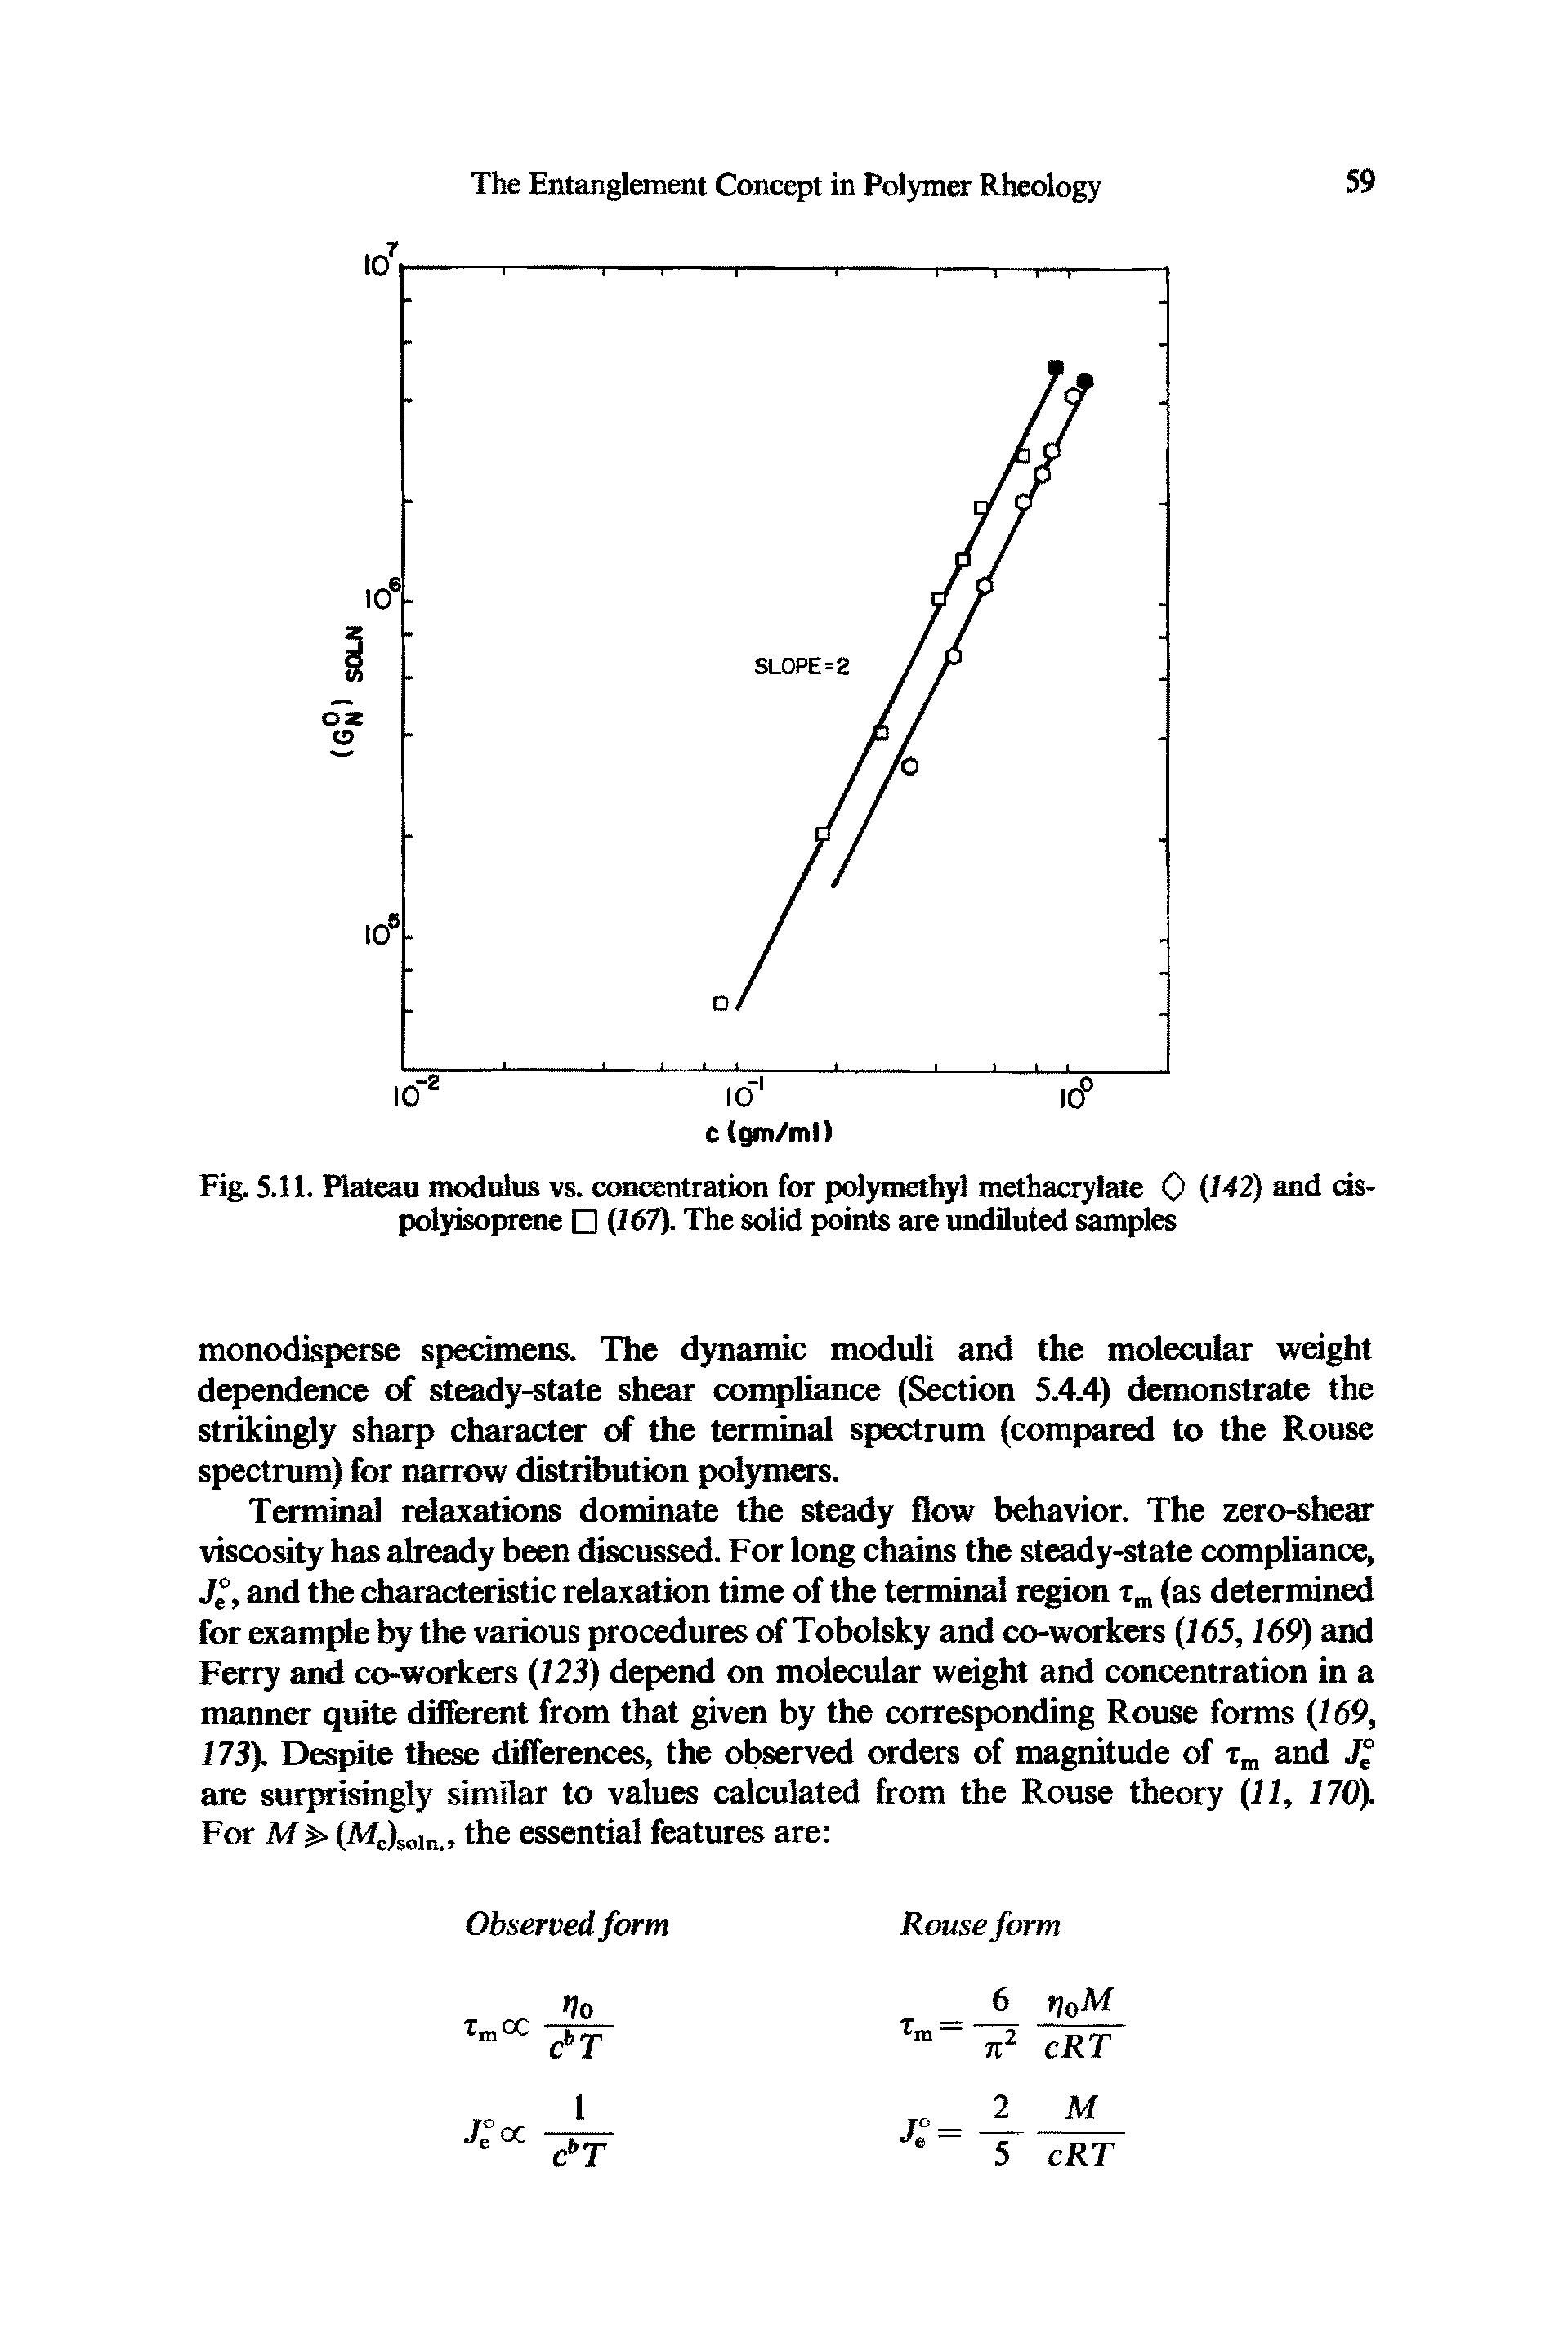 Fig. 5.11. Plateau modulus vs. concentration for polymethyl methacrylate 0 (142) and cis-polyisoprene (167). The solid points are undiluted samples...